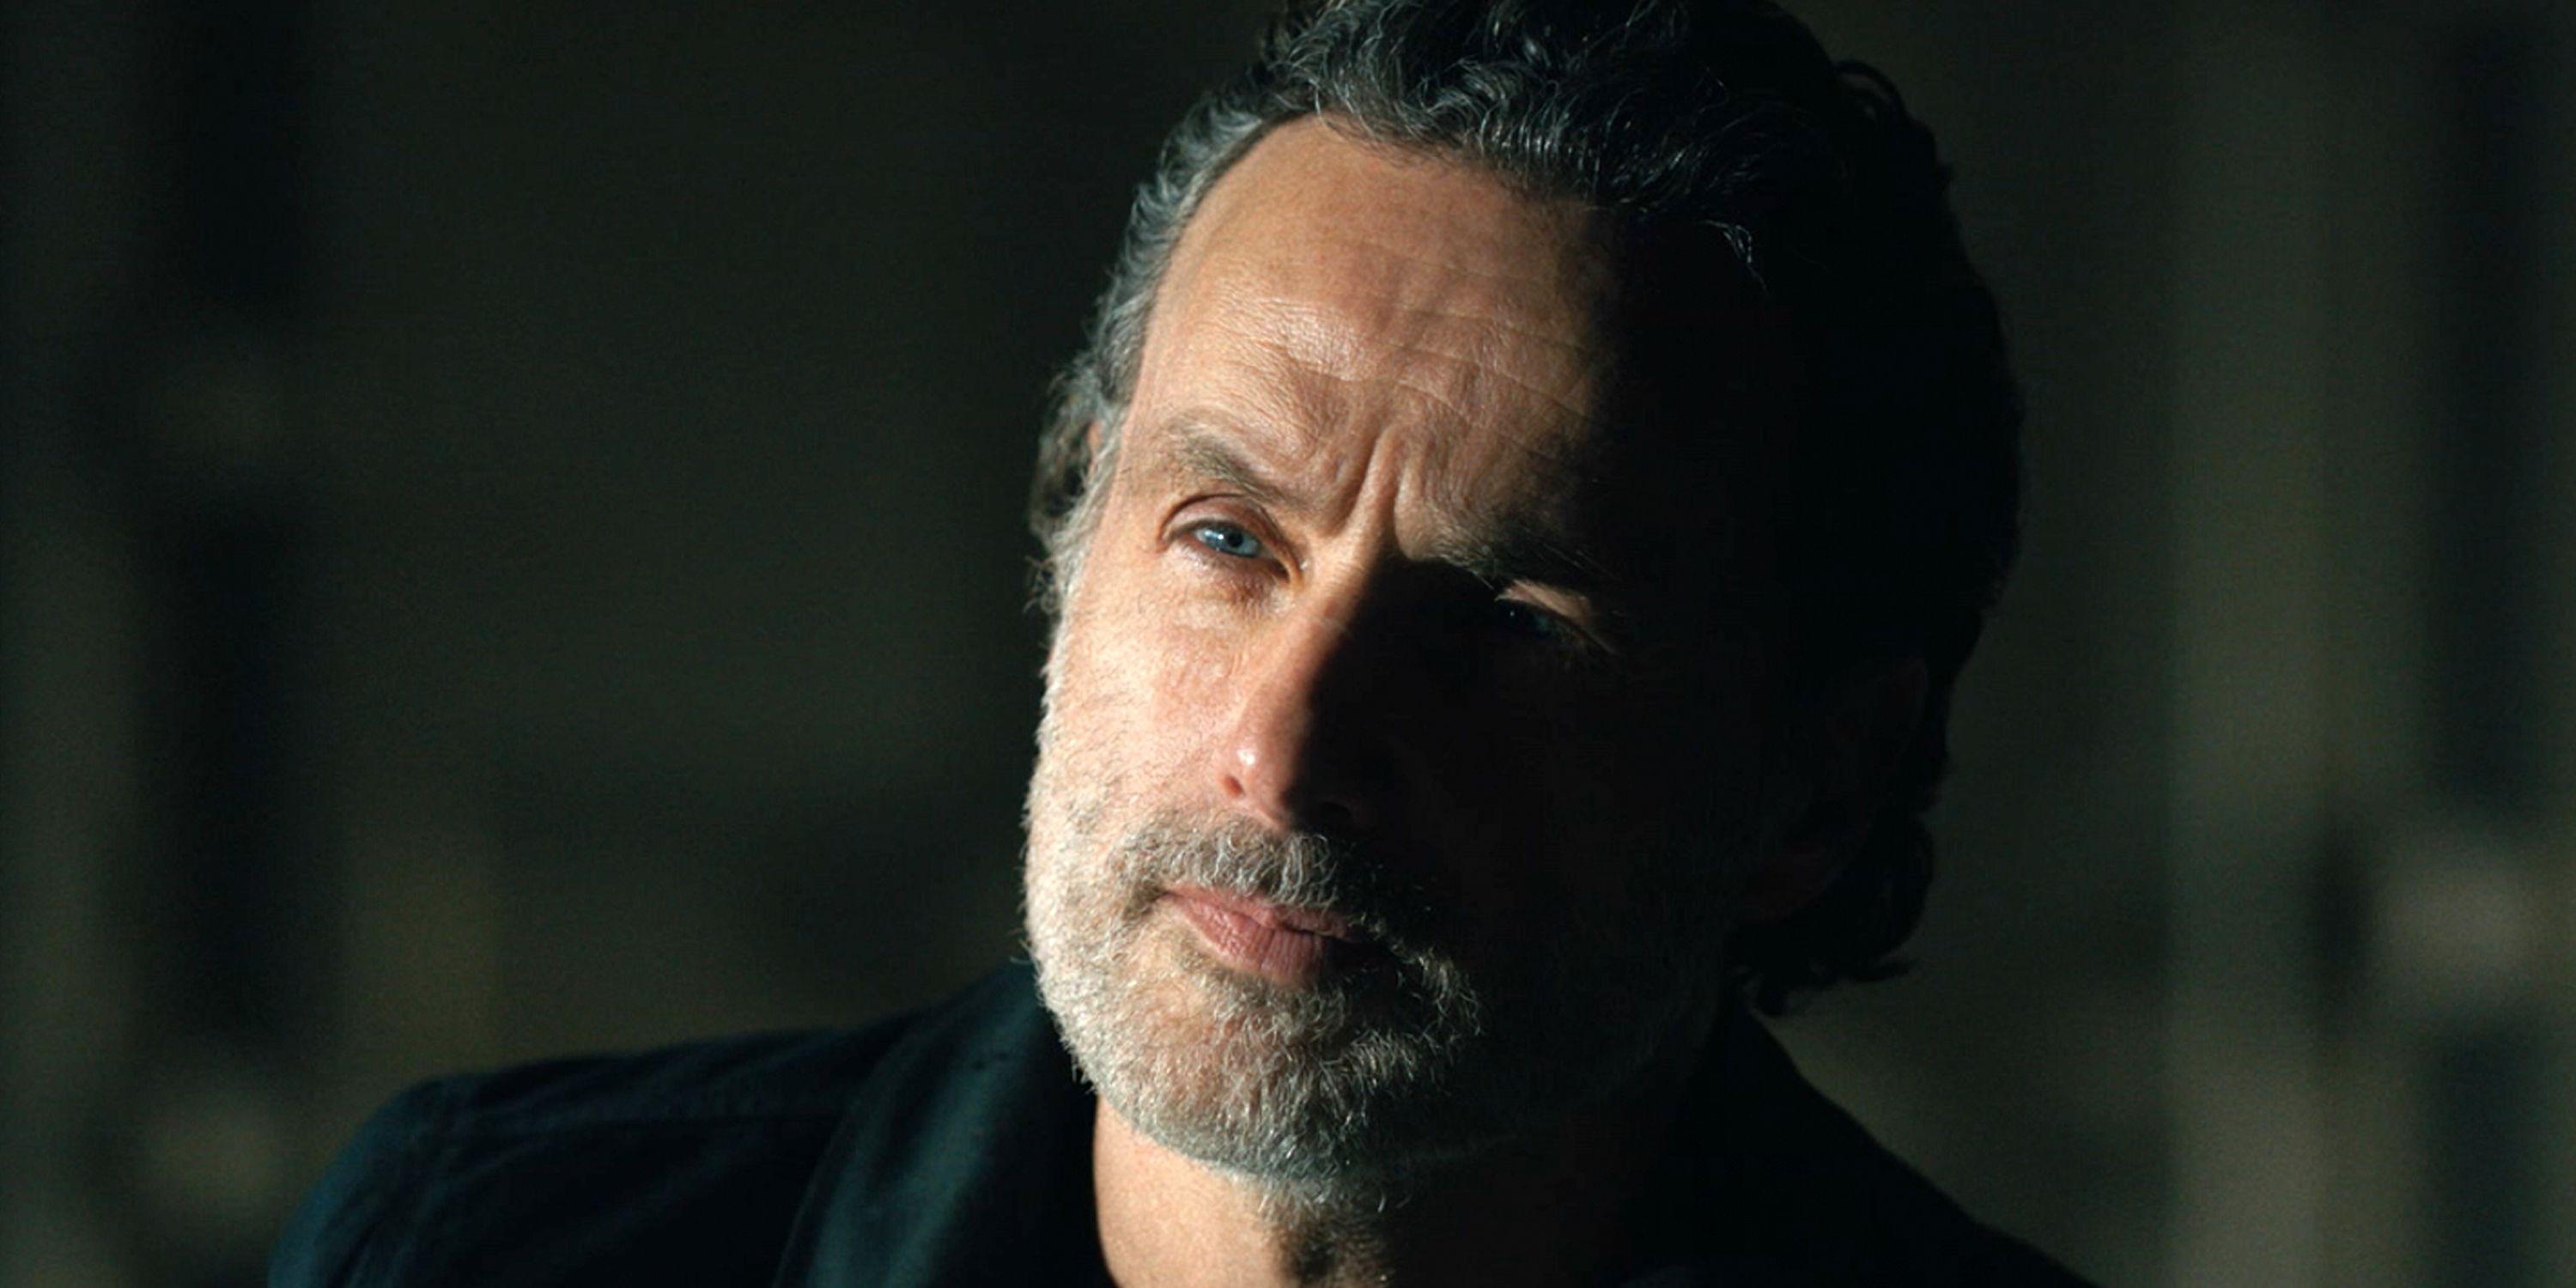 Andrew Lincoln as Rick Grimes in Episode 1 of Season 1 of AMC's The Walking Dead: The Ones Who Live